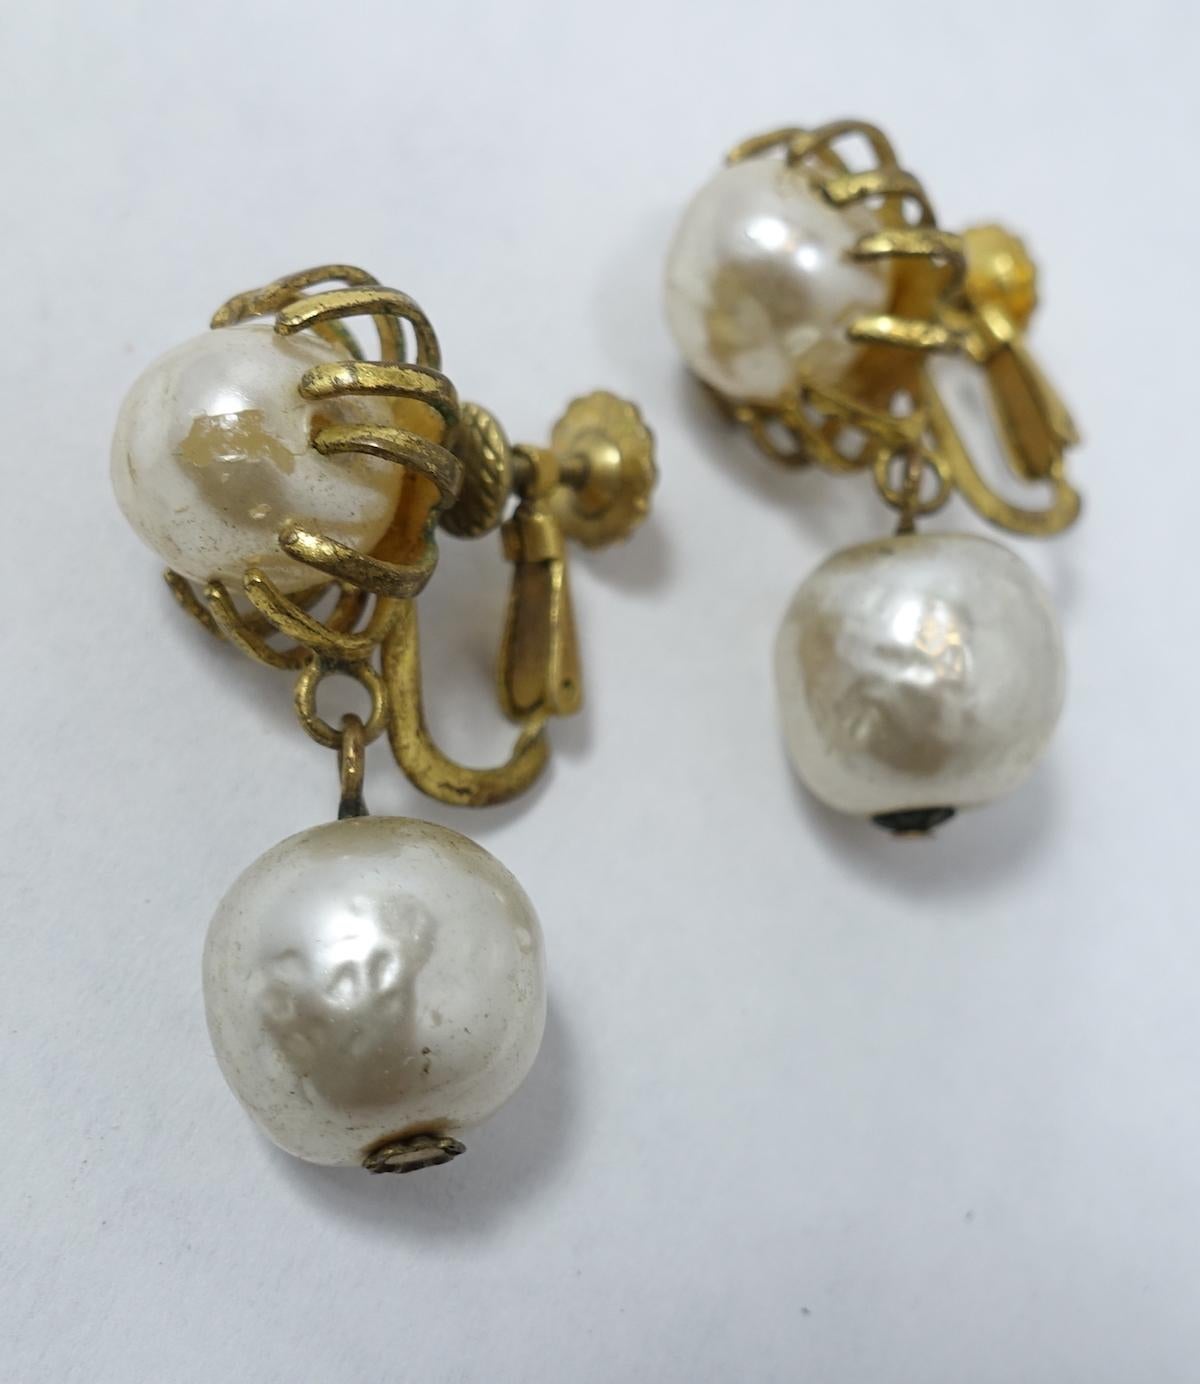 These vintage 1950s Miriam Haskell earrings features faux pearl tops embedded with gold tone prongs. Another faux pearl drop below.  These clip earrings measure 1-1/4” x 1-1/2” and are signed “Miriam Haskell”.  They are in excellent condition.